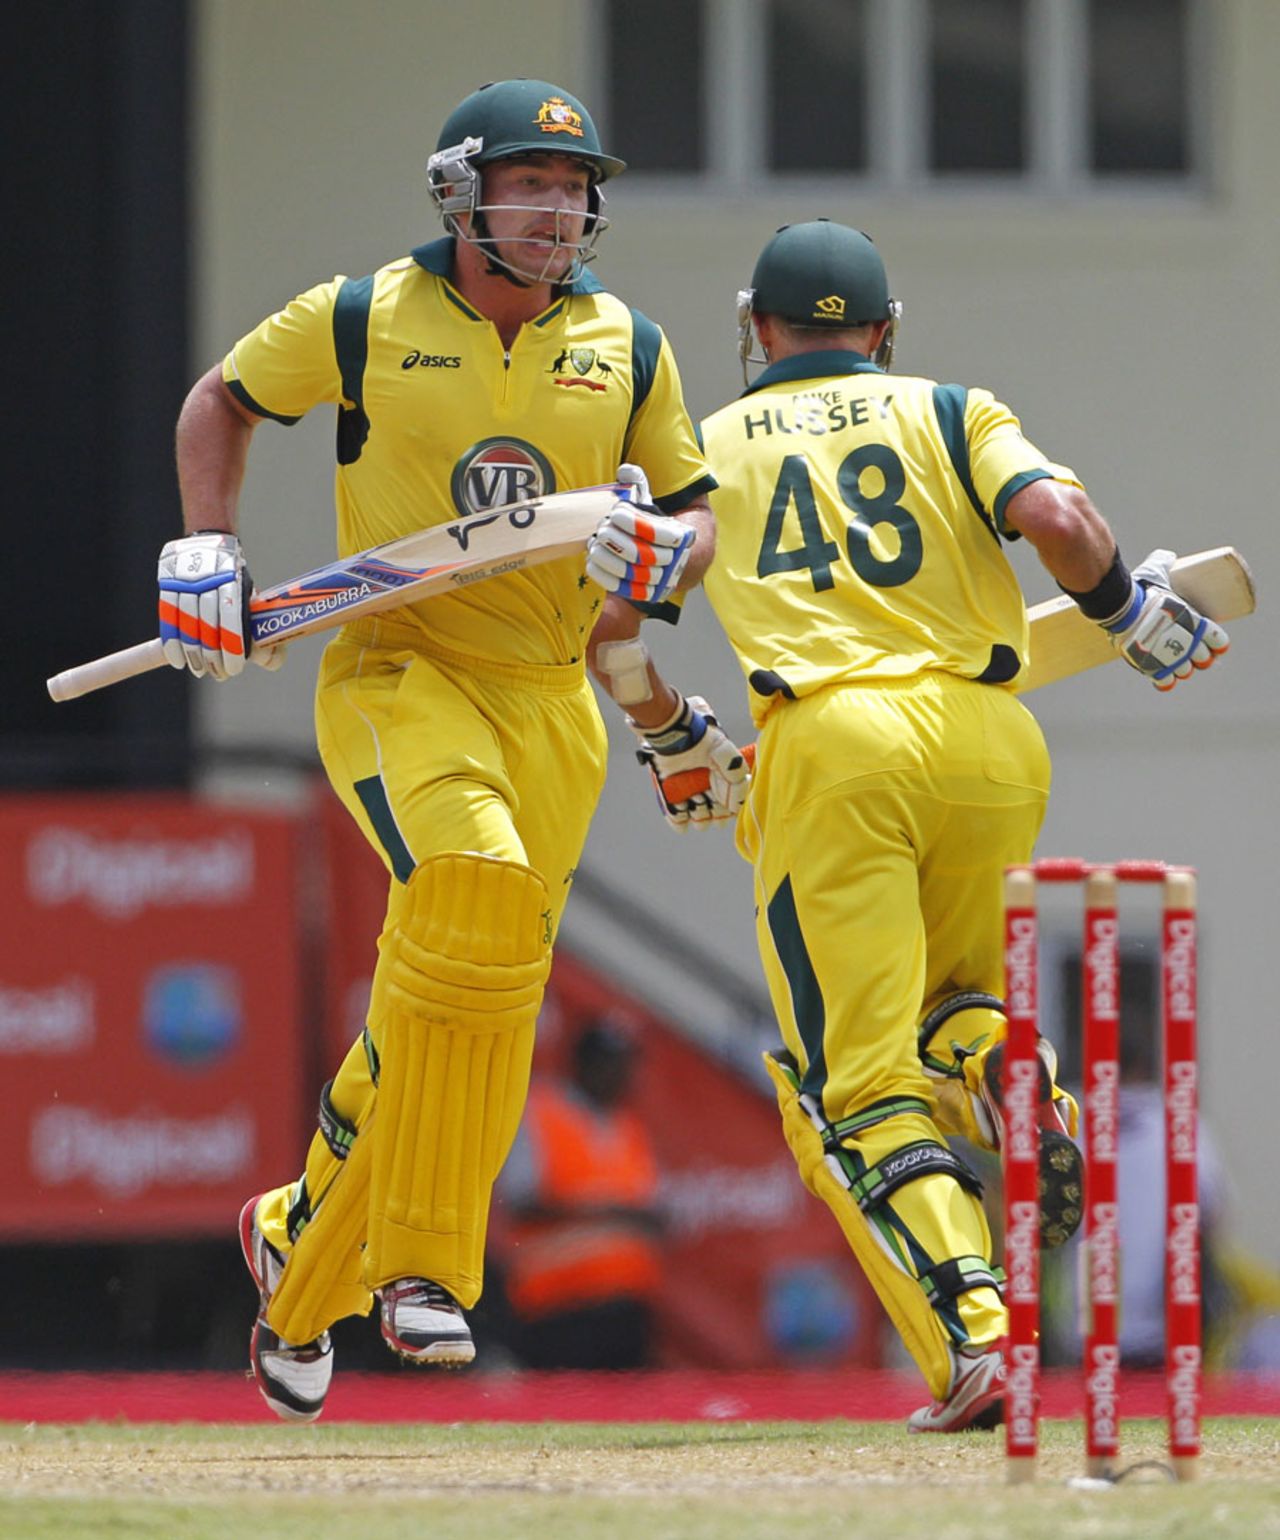 Peter Forrest completes a run that takes him to fifty, West Indies v Australia, 5th ODI, Gros Islet, March 25, 2012